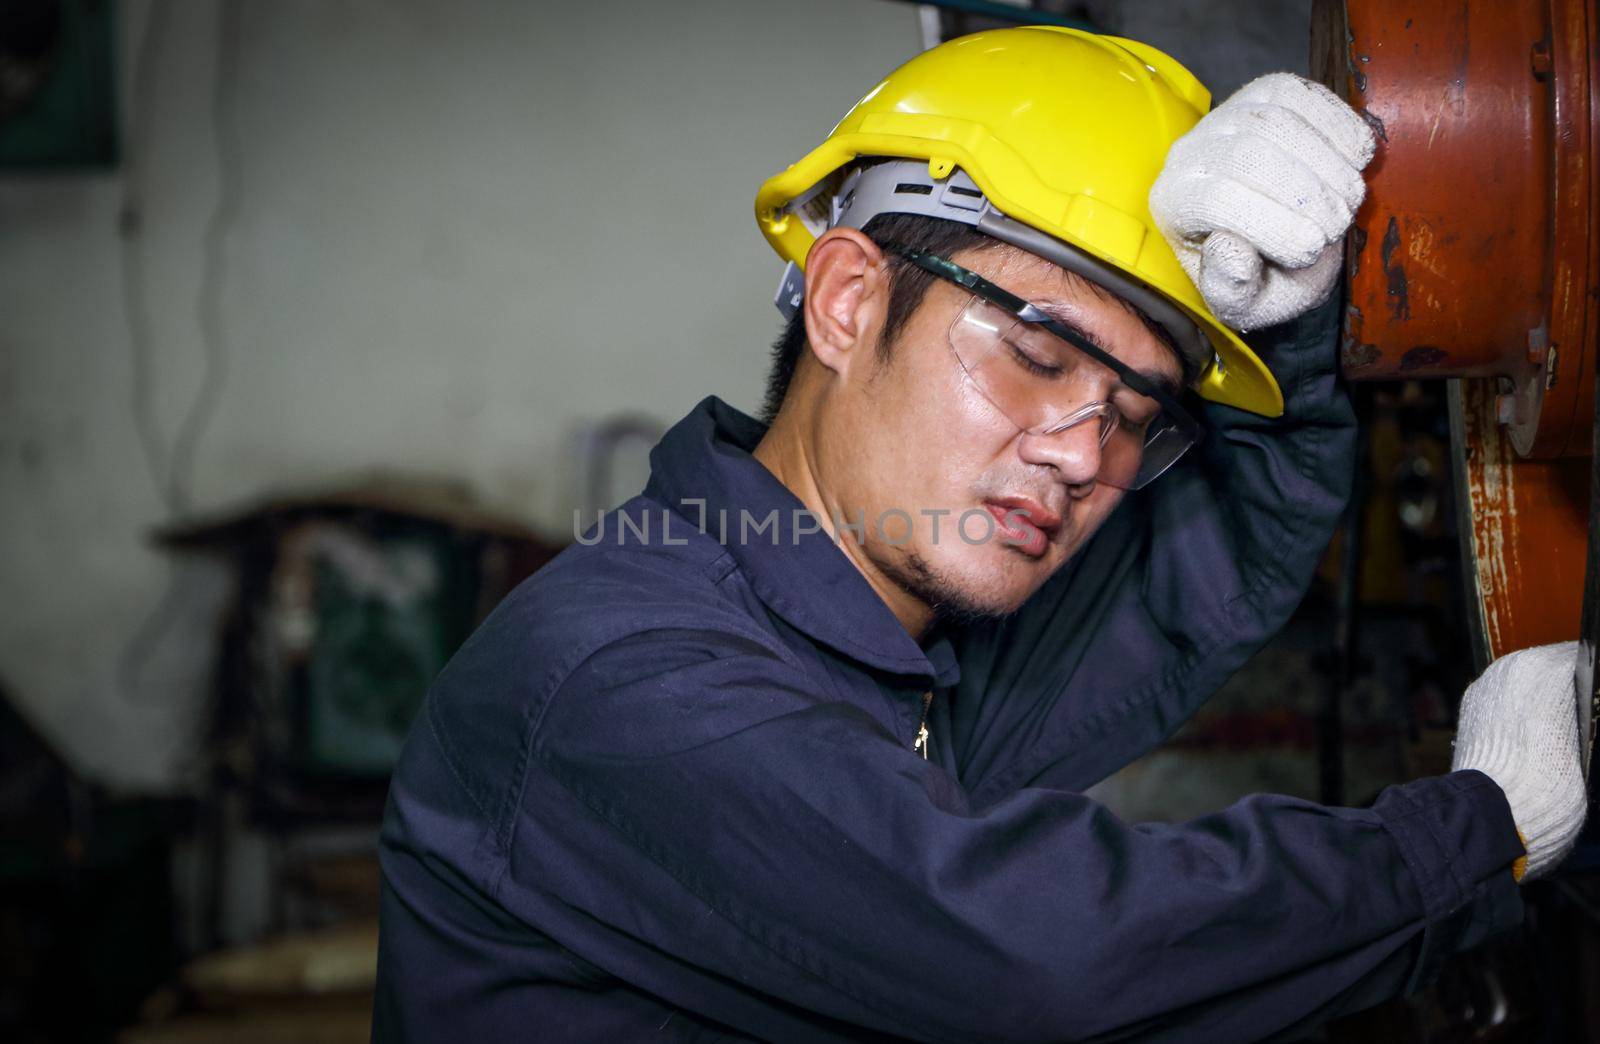 Asian male worker Dressed in uniform, helmets and safety glasses, taking a nap after work, inspection, maintenance of a metal press at the factory.